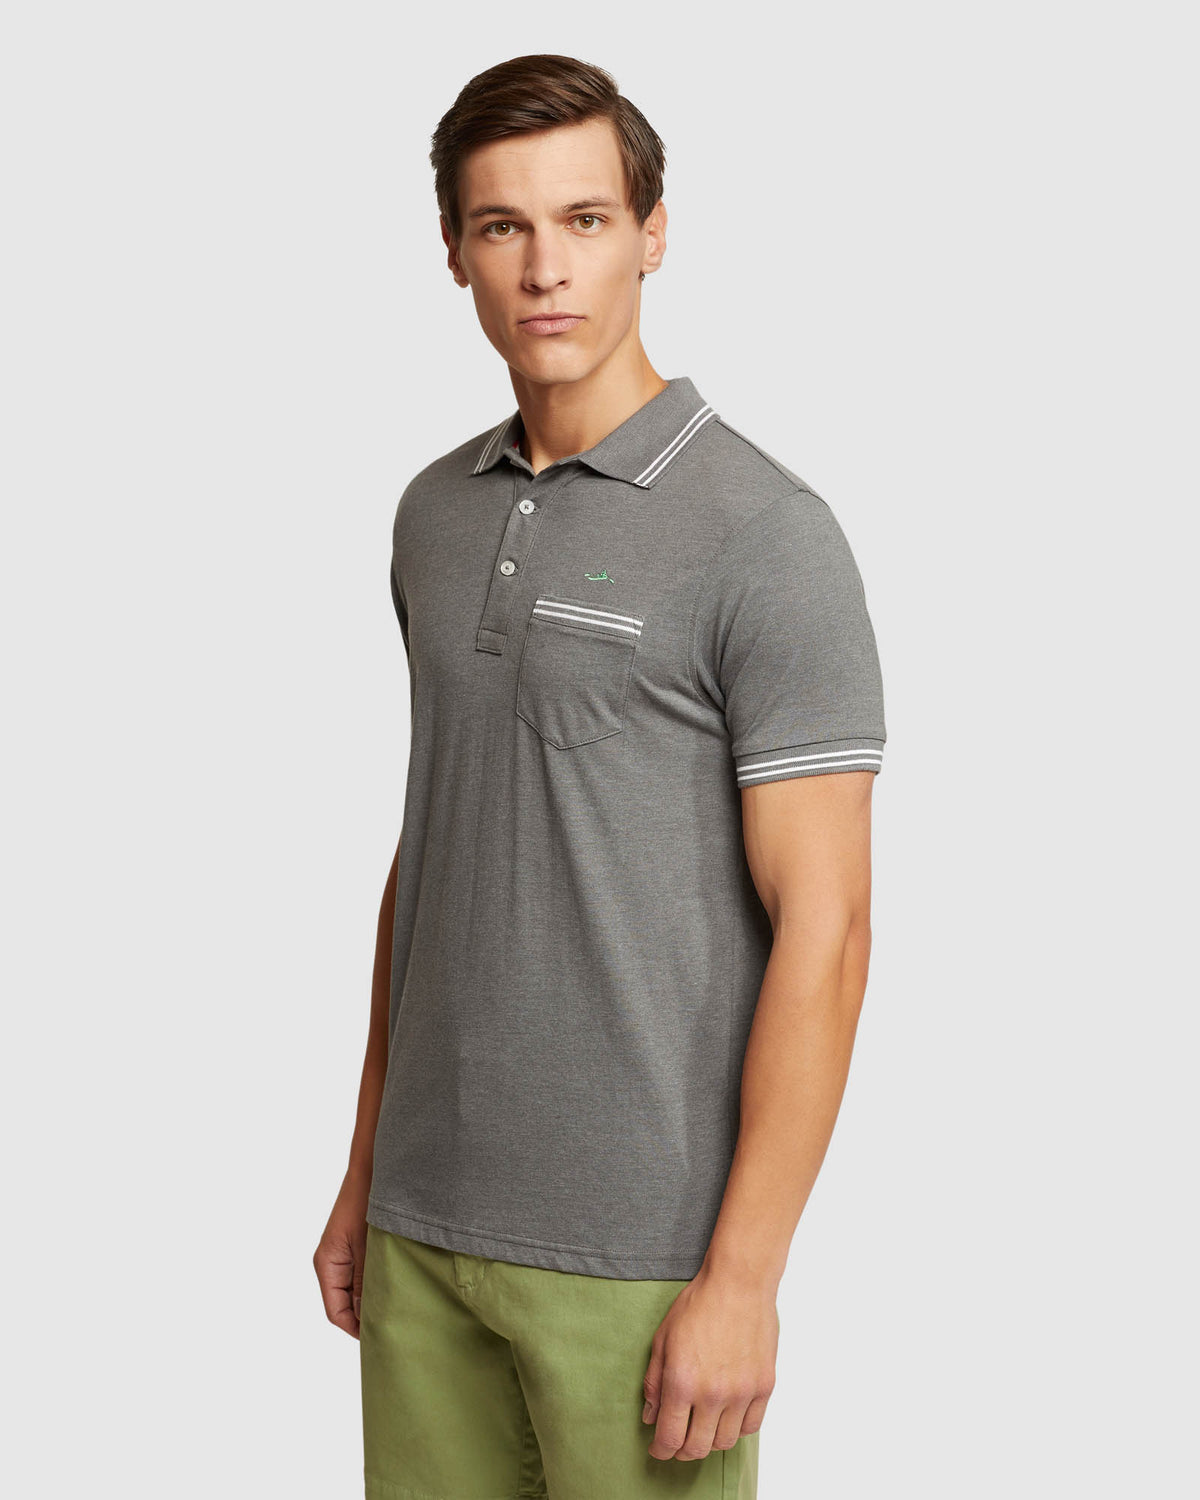 NICKSON TIPPING JERSEY POLO MENS KNITS